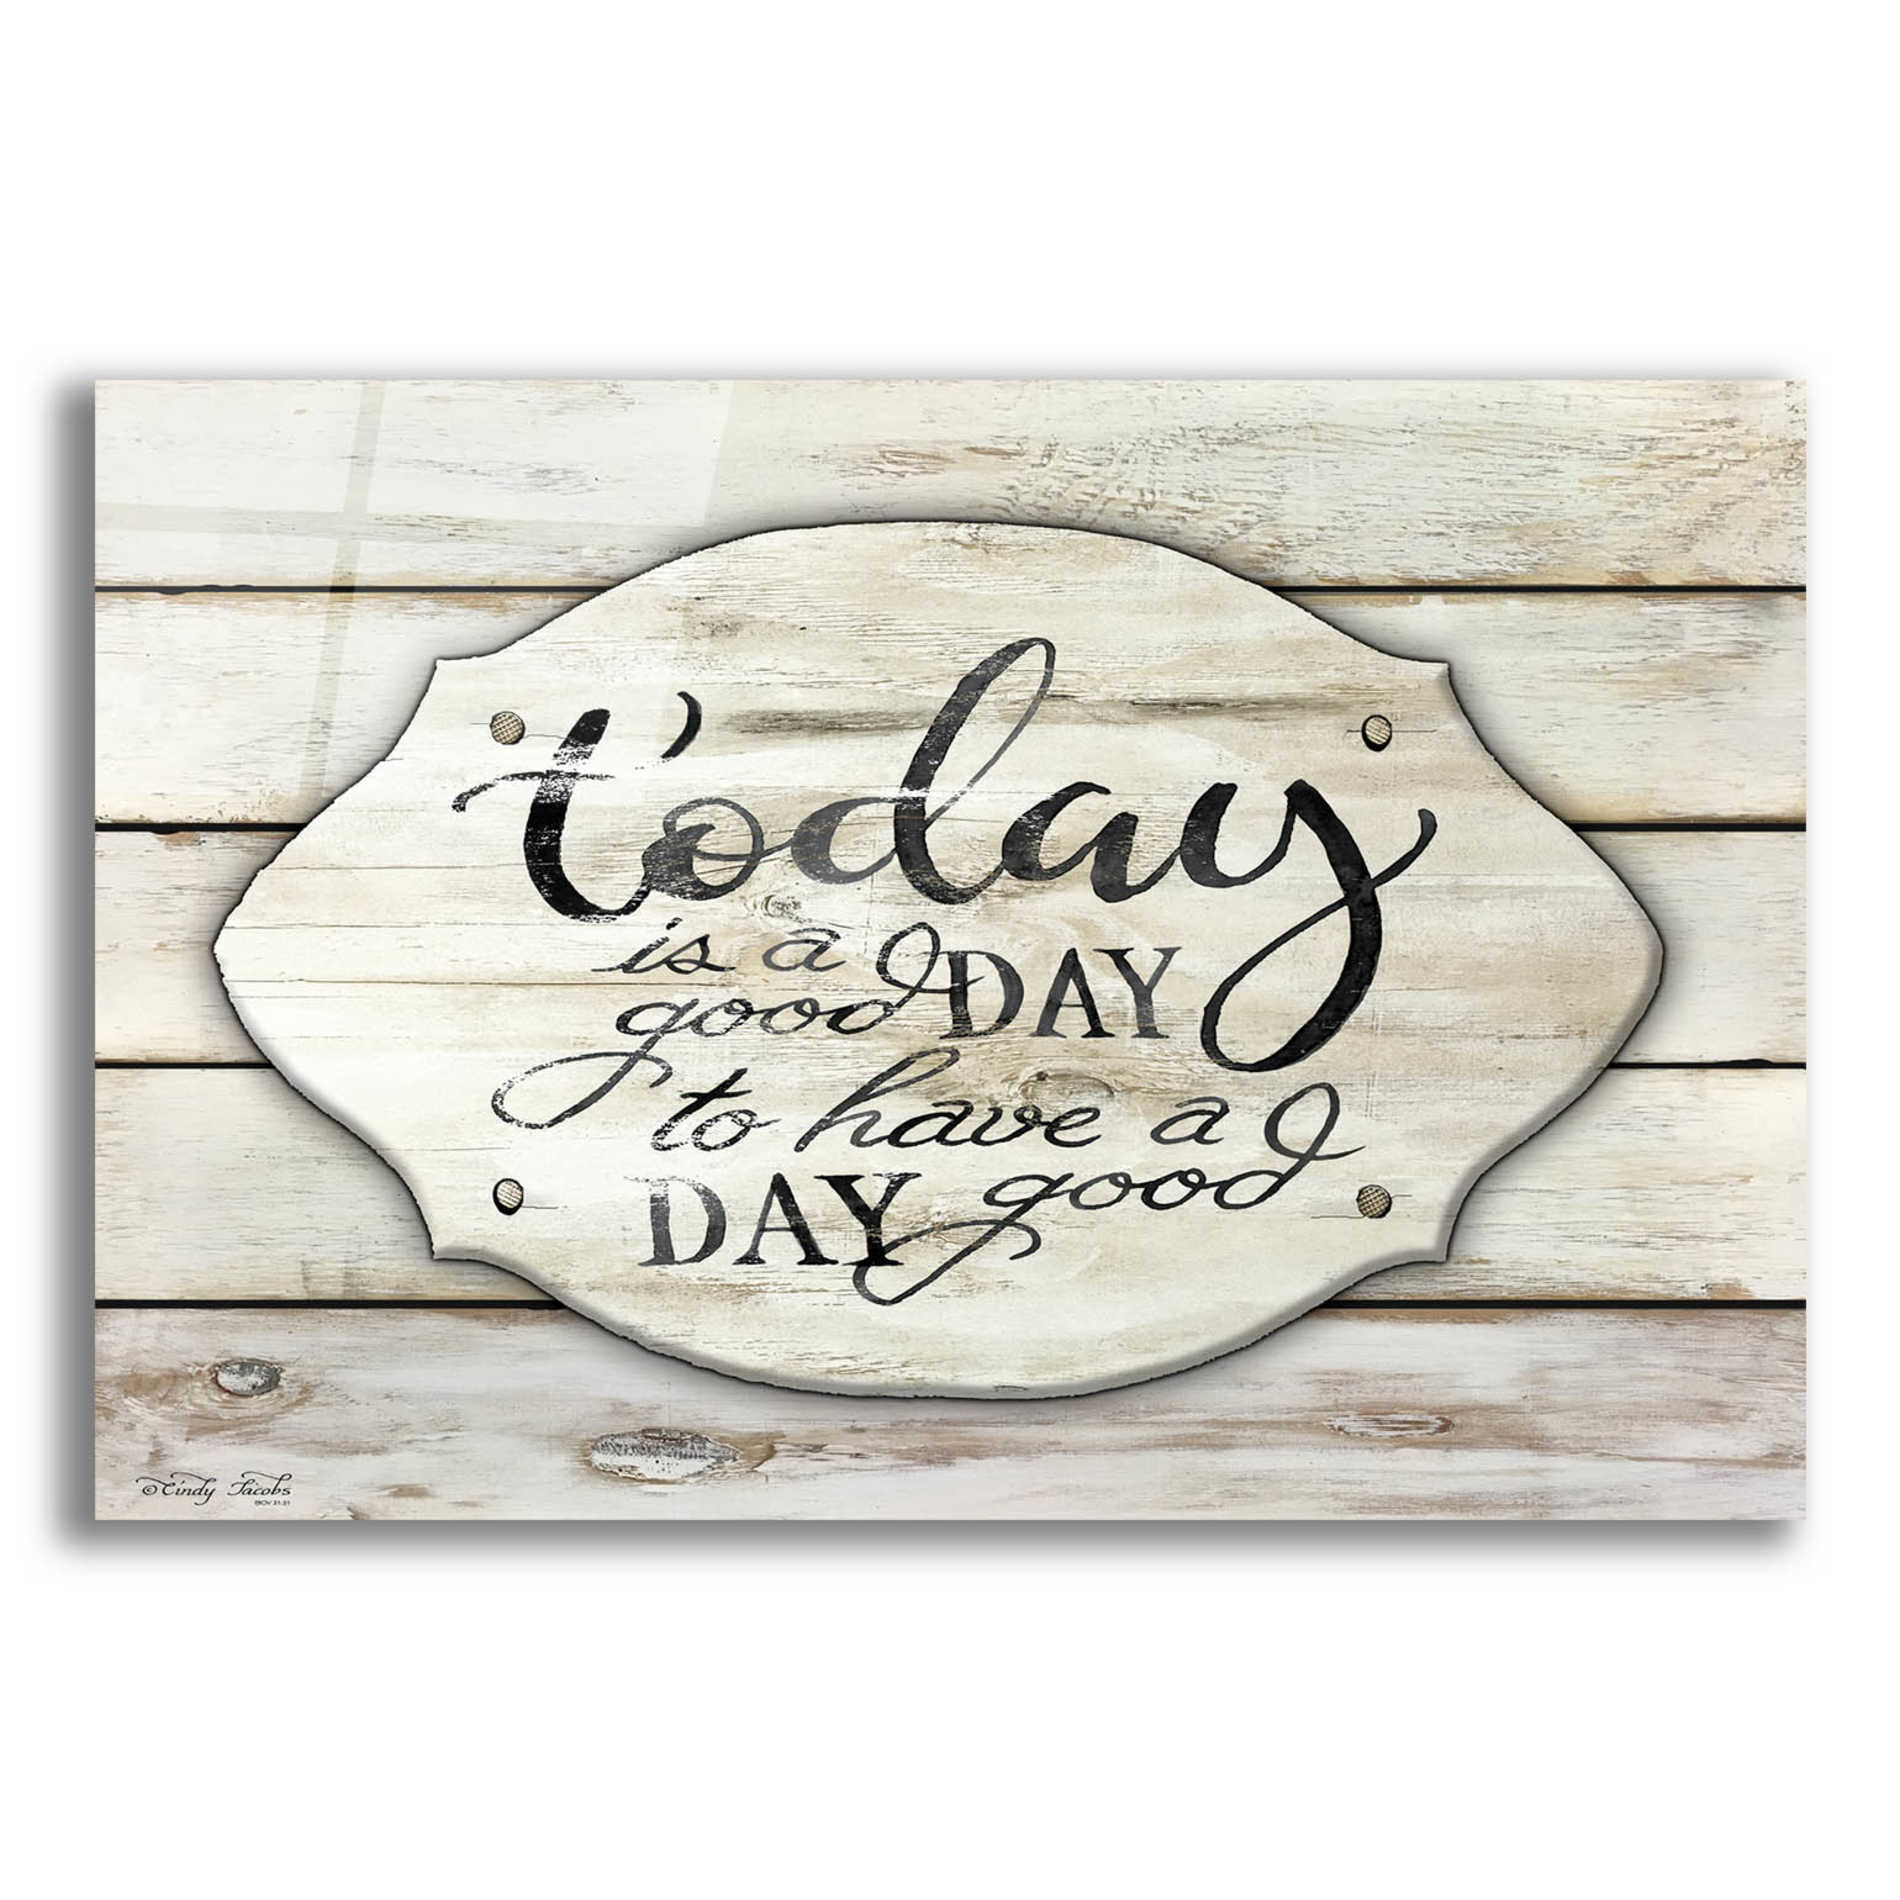 Epic Art 'Today is a Good Day' by Cindy Jacobs, Acrylic Glass Wall Art,24x16